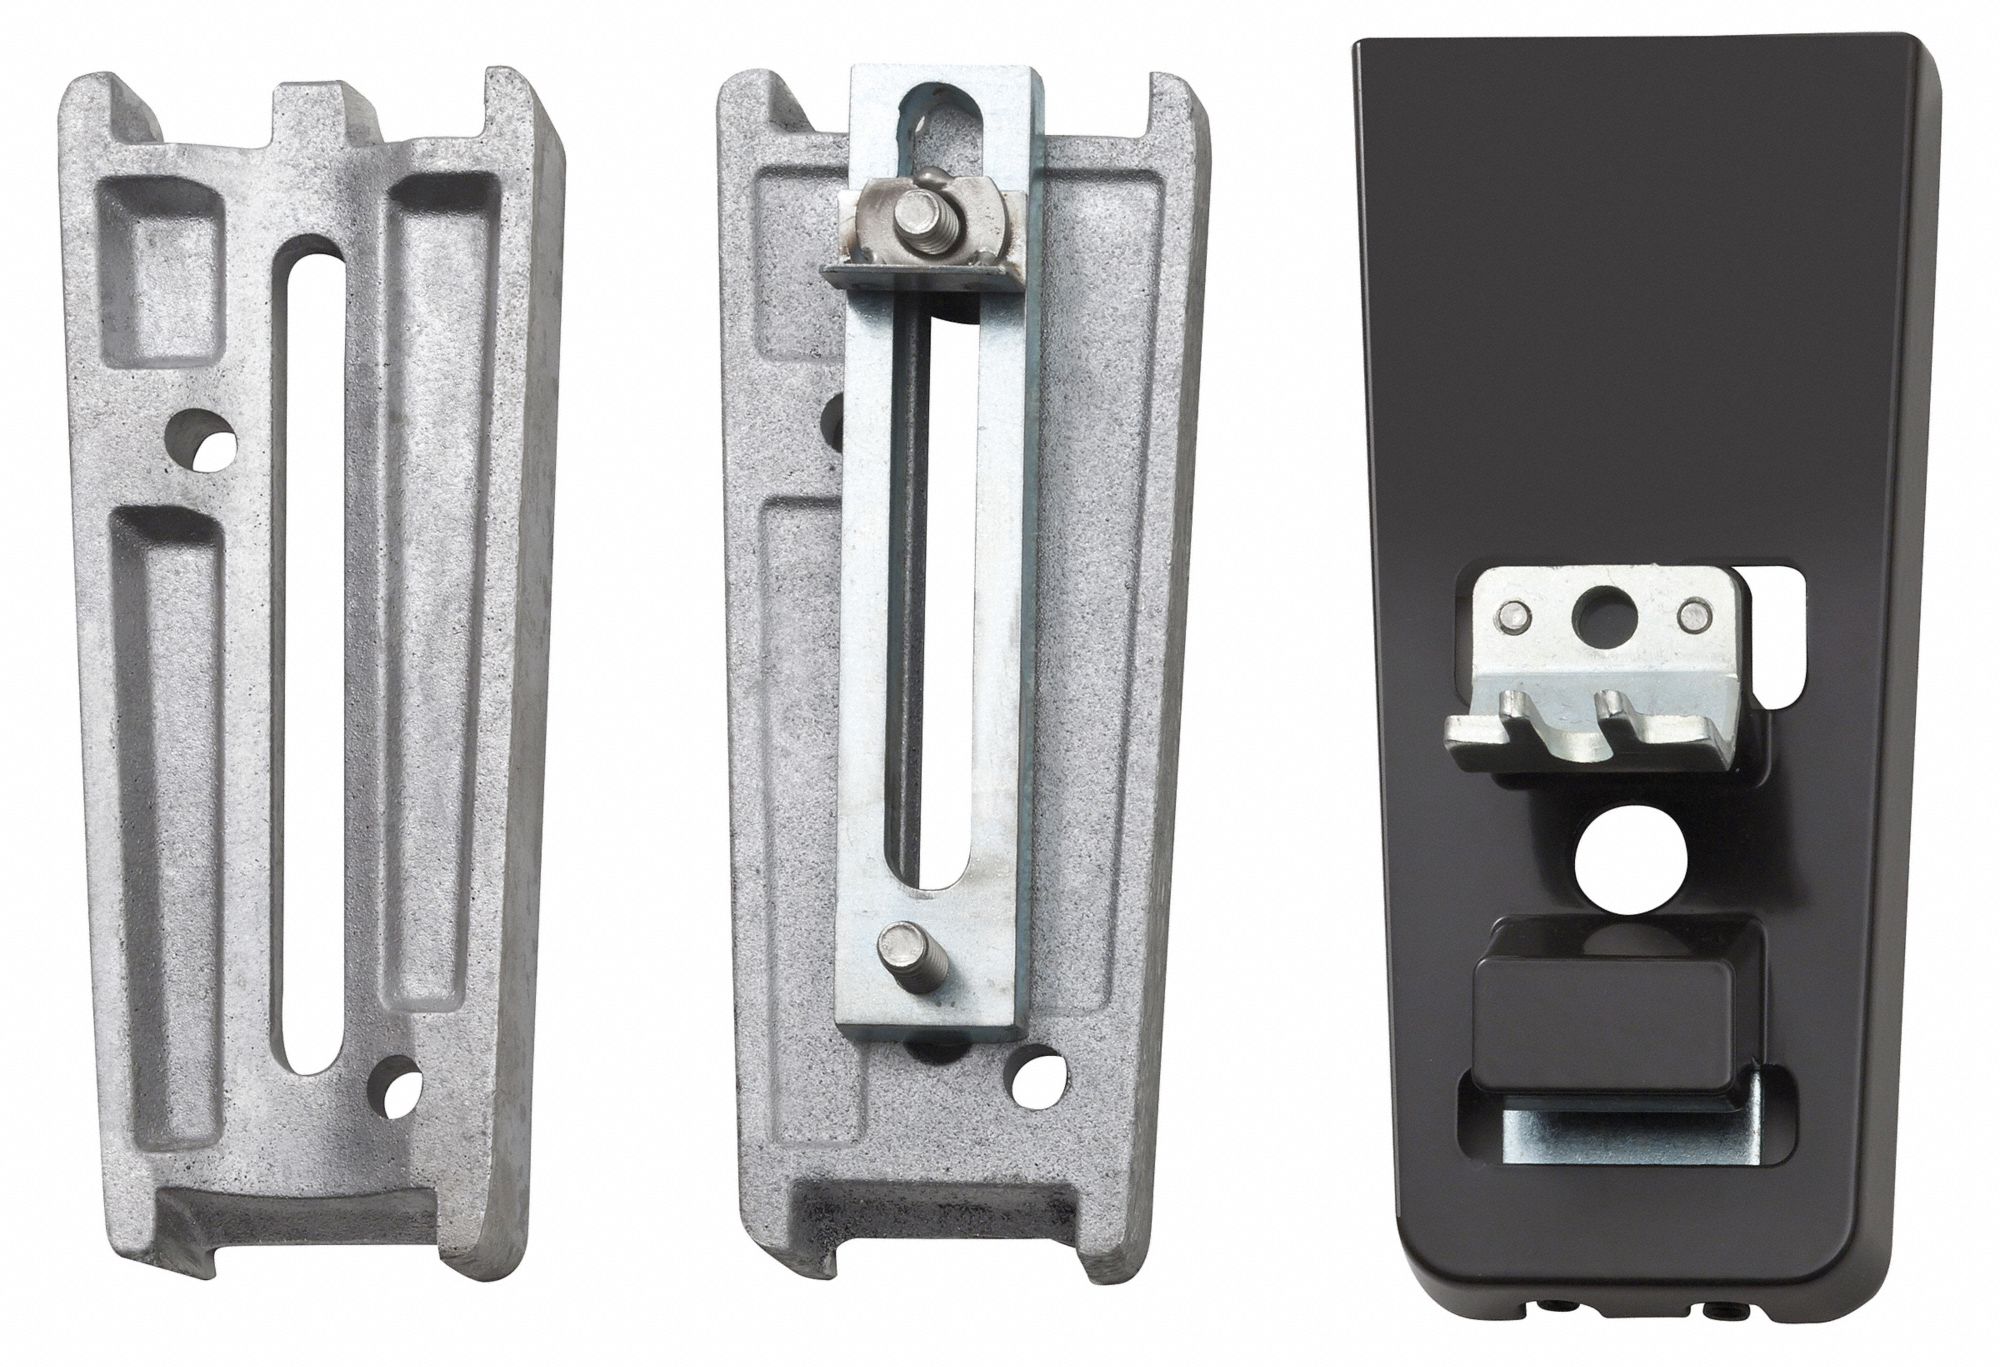 20JN98 - Pole Bracket For Round and Square Poles